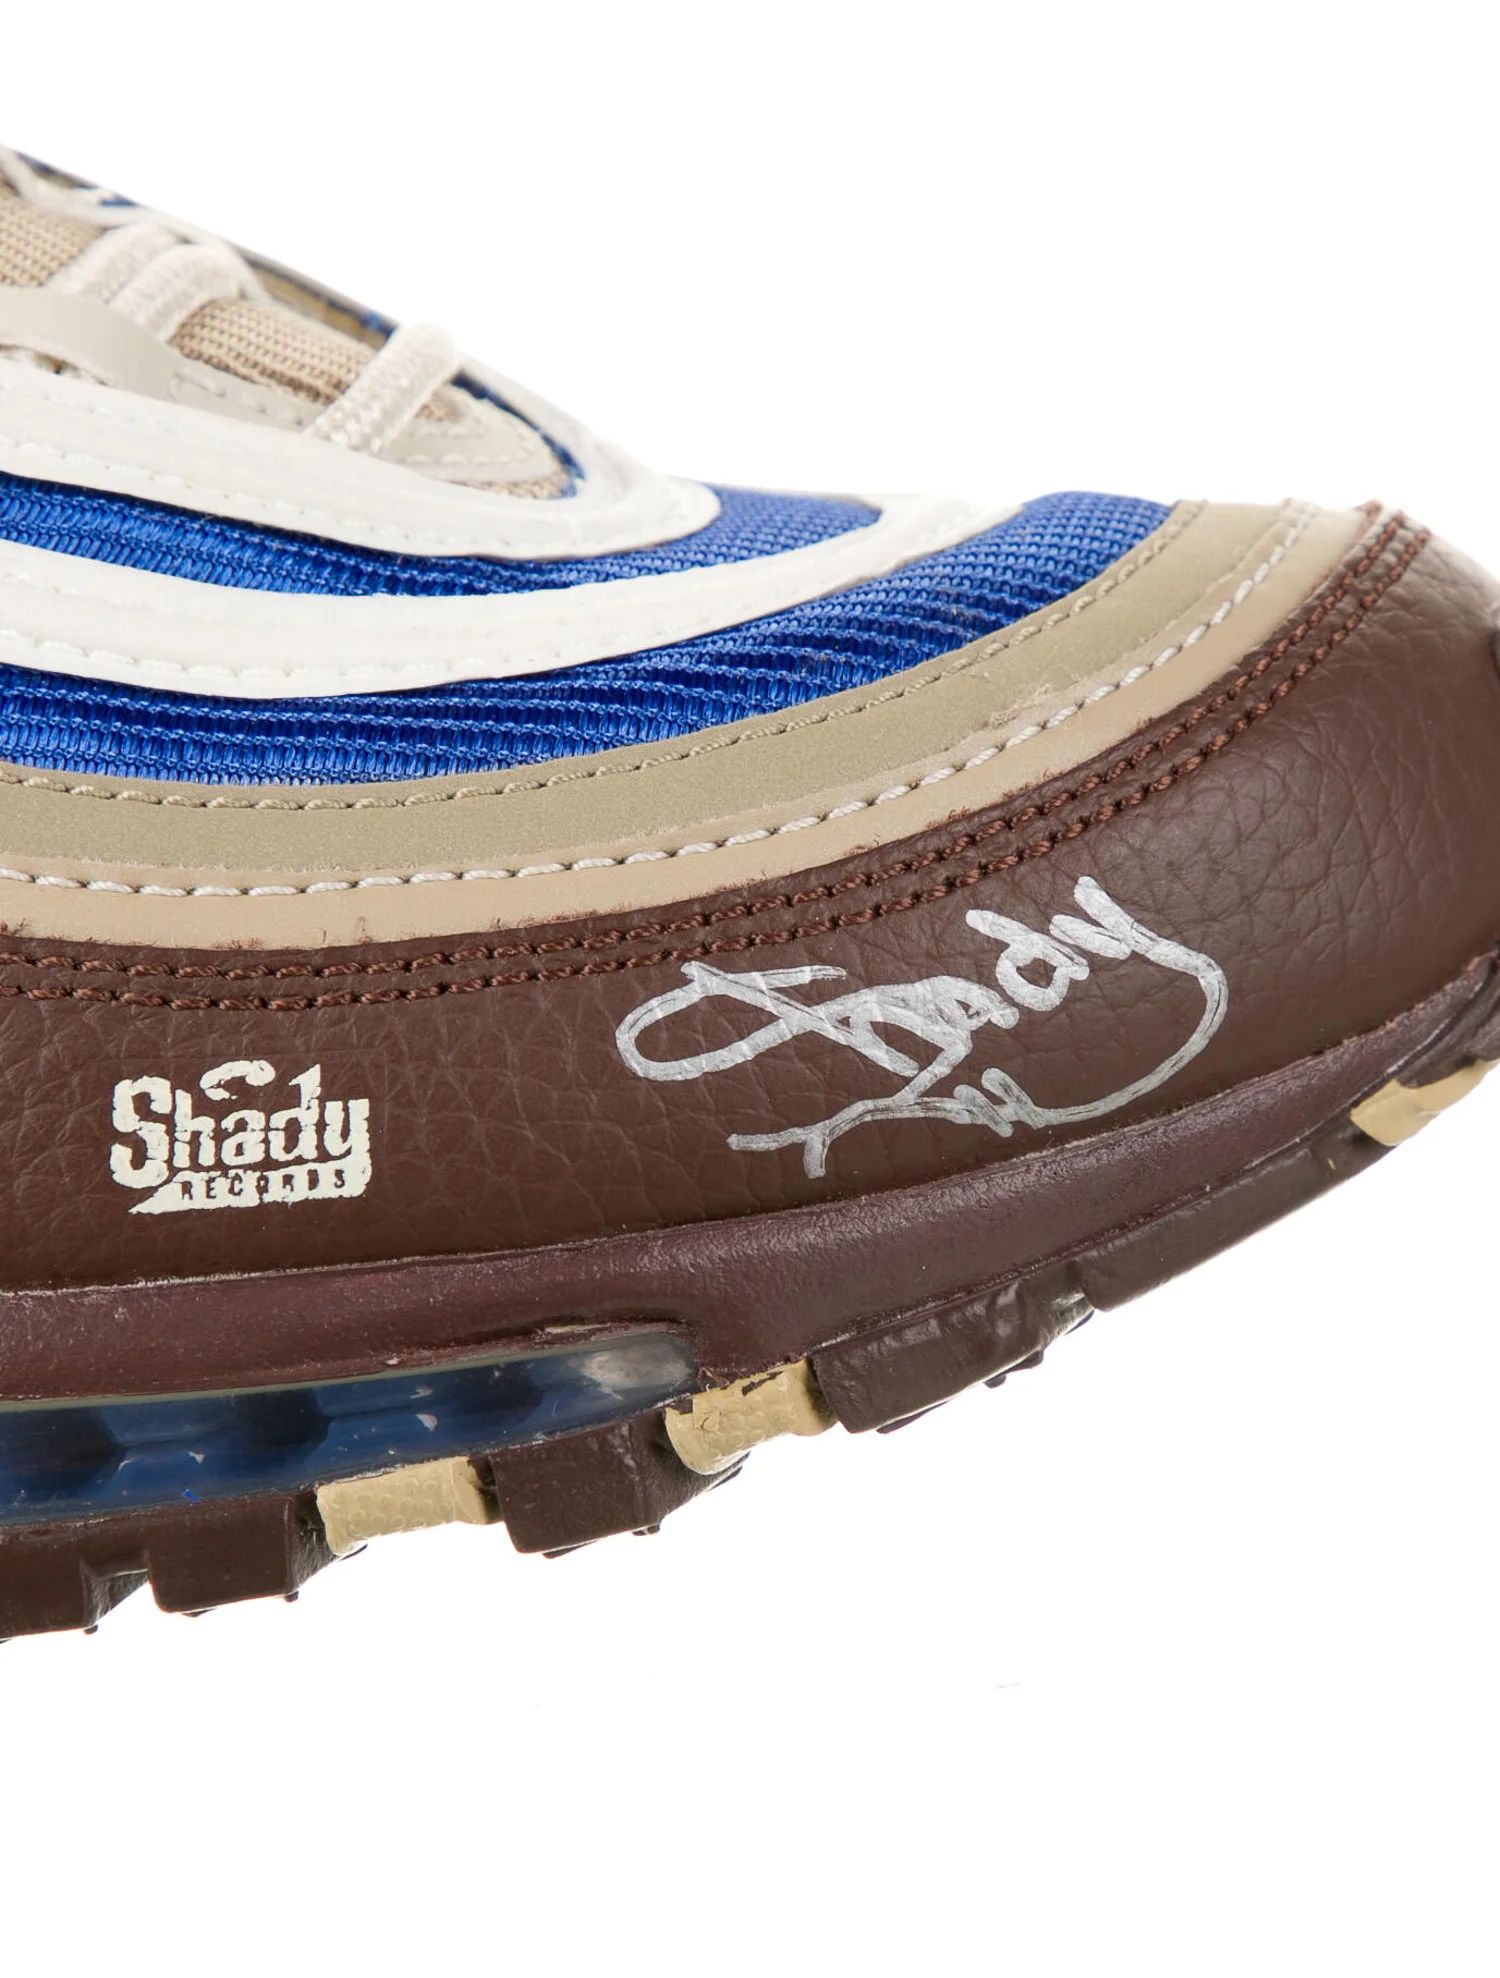 A Complete History of Eminems Signature Sneakers - Charity Nike Air Max 95  by Paul Rosenberg “Goliath” – 2006